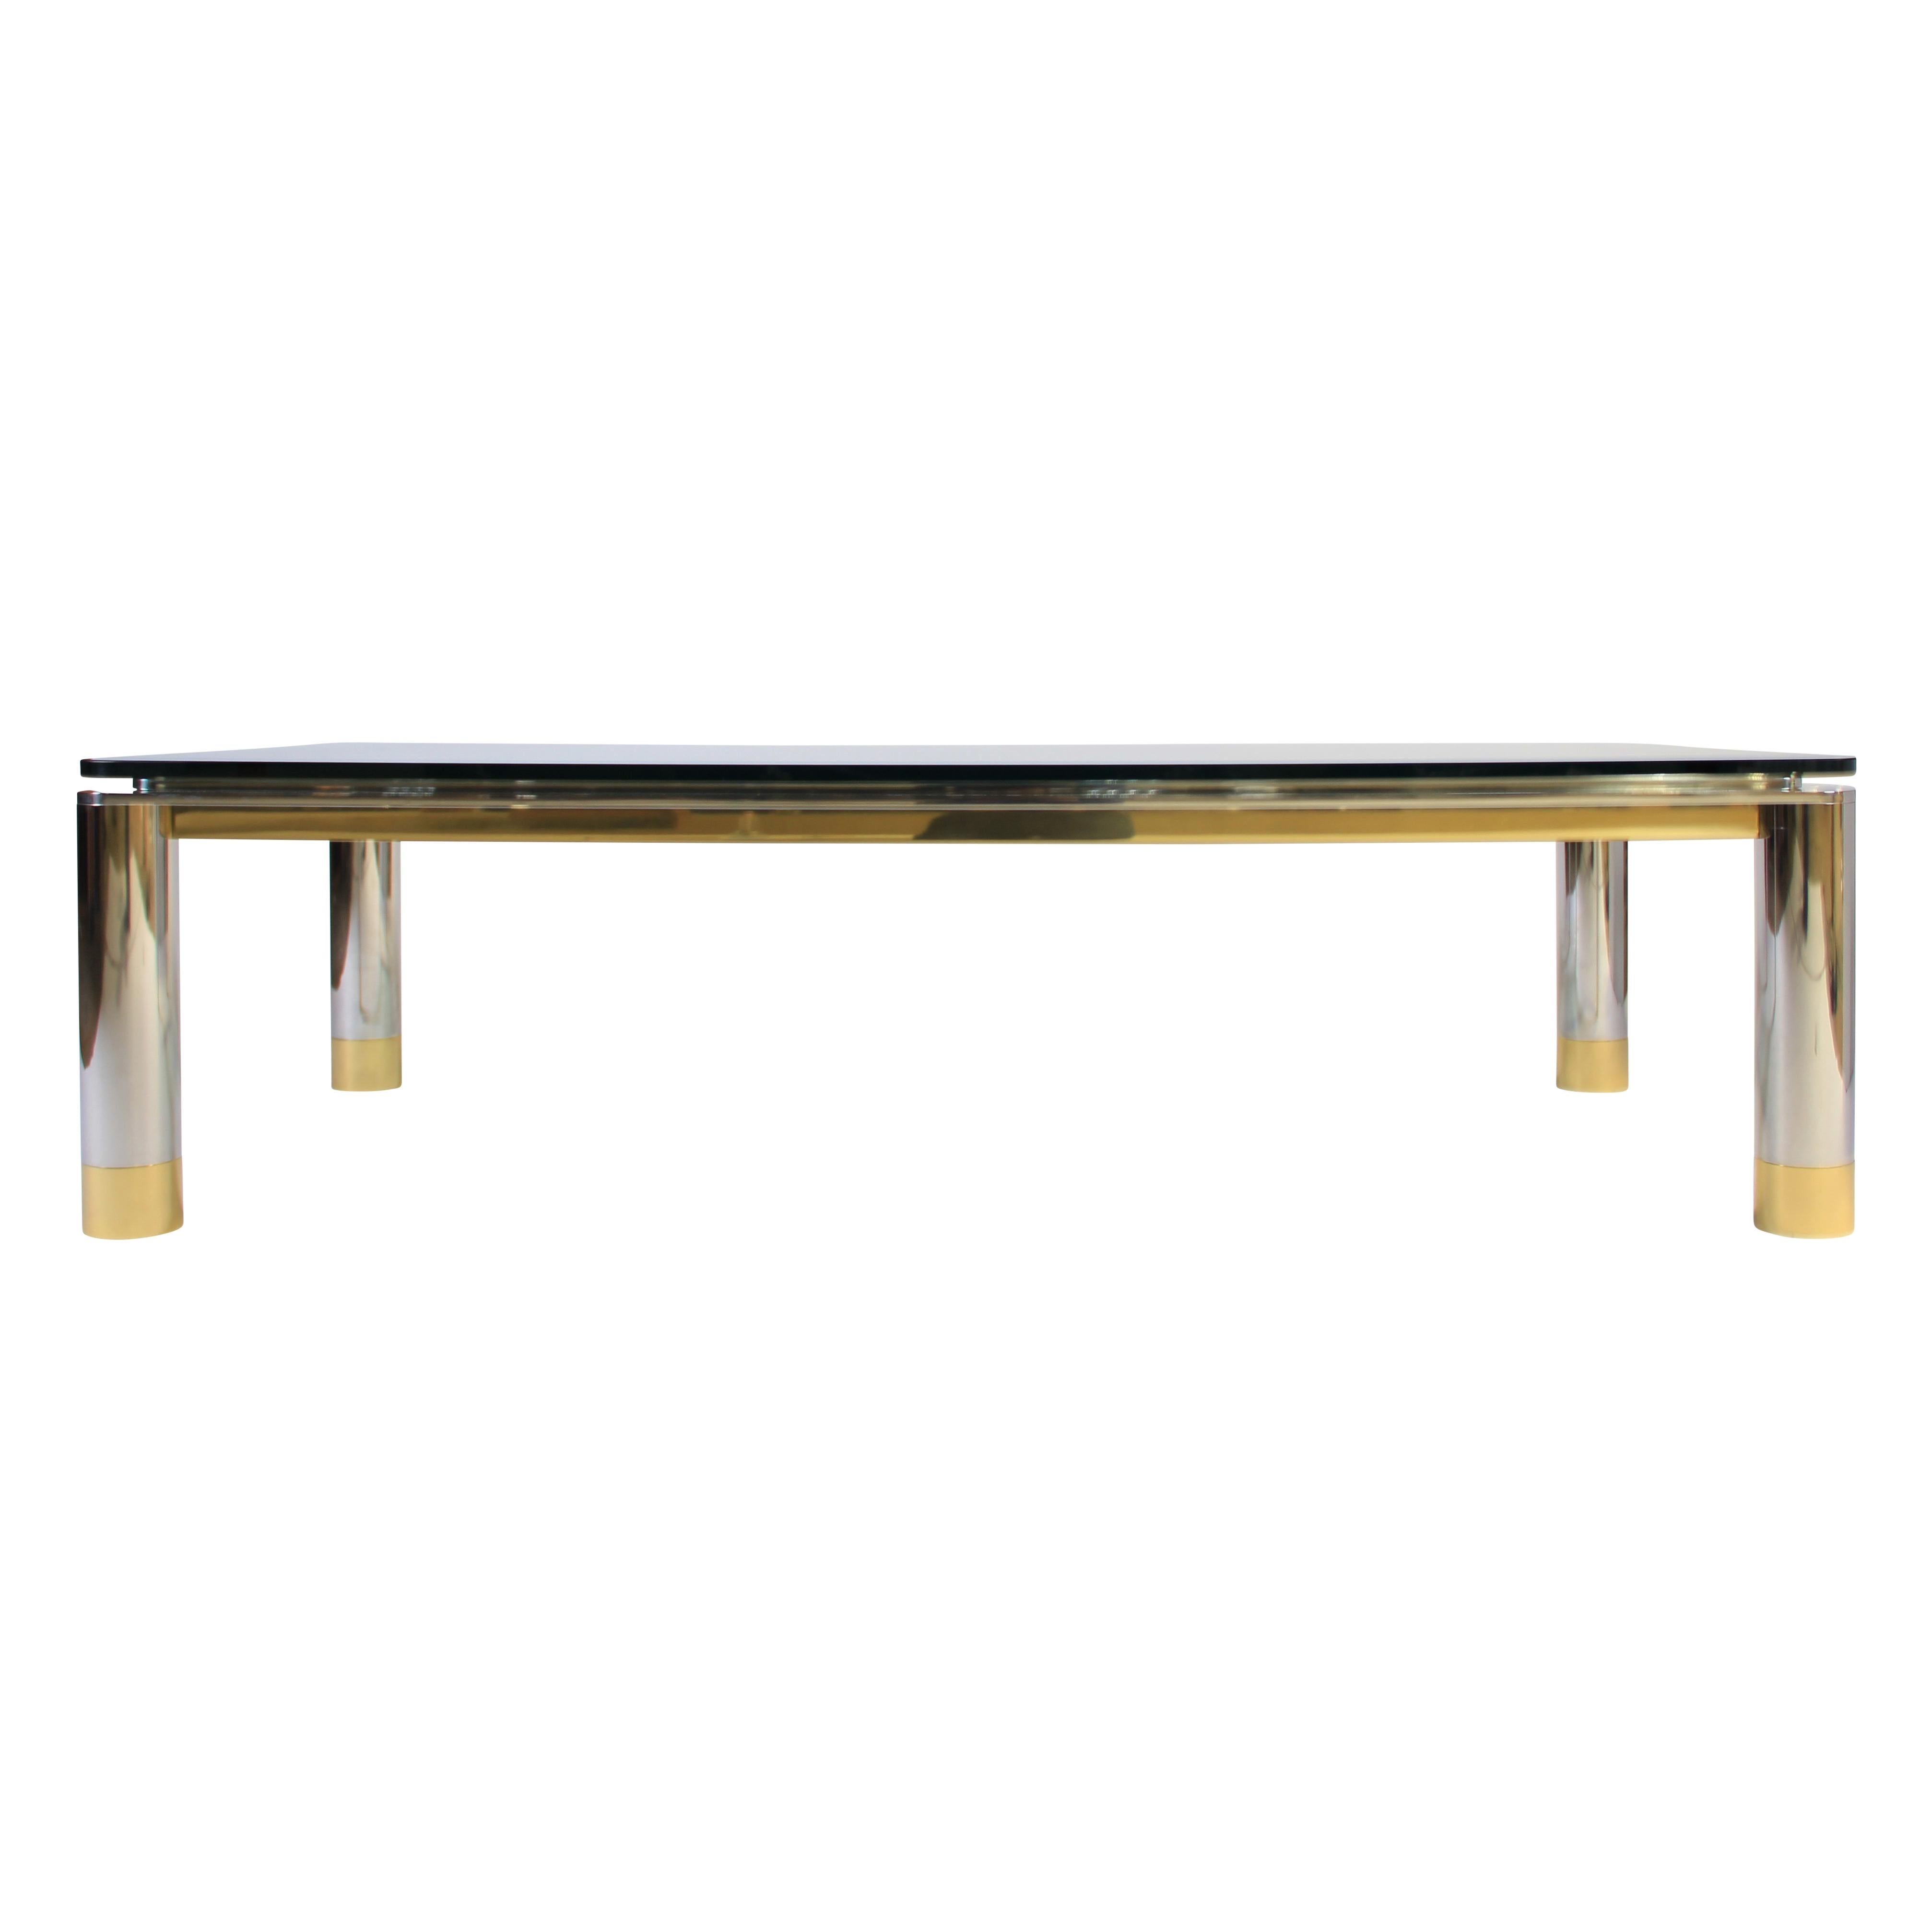 Stunning and beautifully made rectangular coffee table features a heavy polished stainless steel frame and cylindrical legs with a polished-brass skirt and feet. We can't emphasize enough how substantial this piece is, and please note that both the